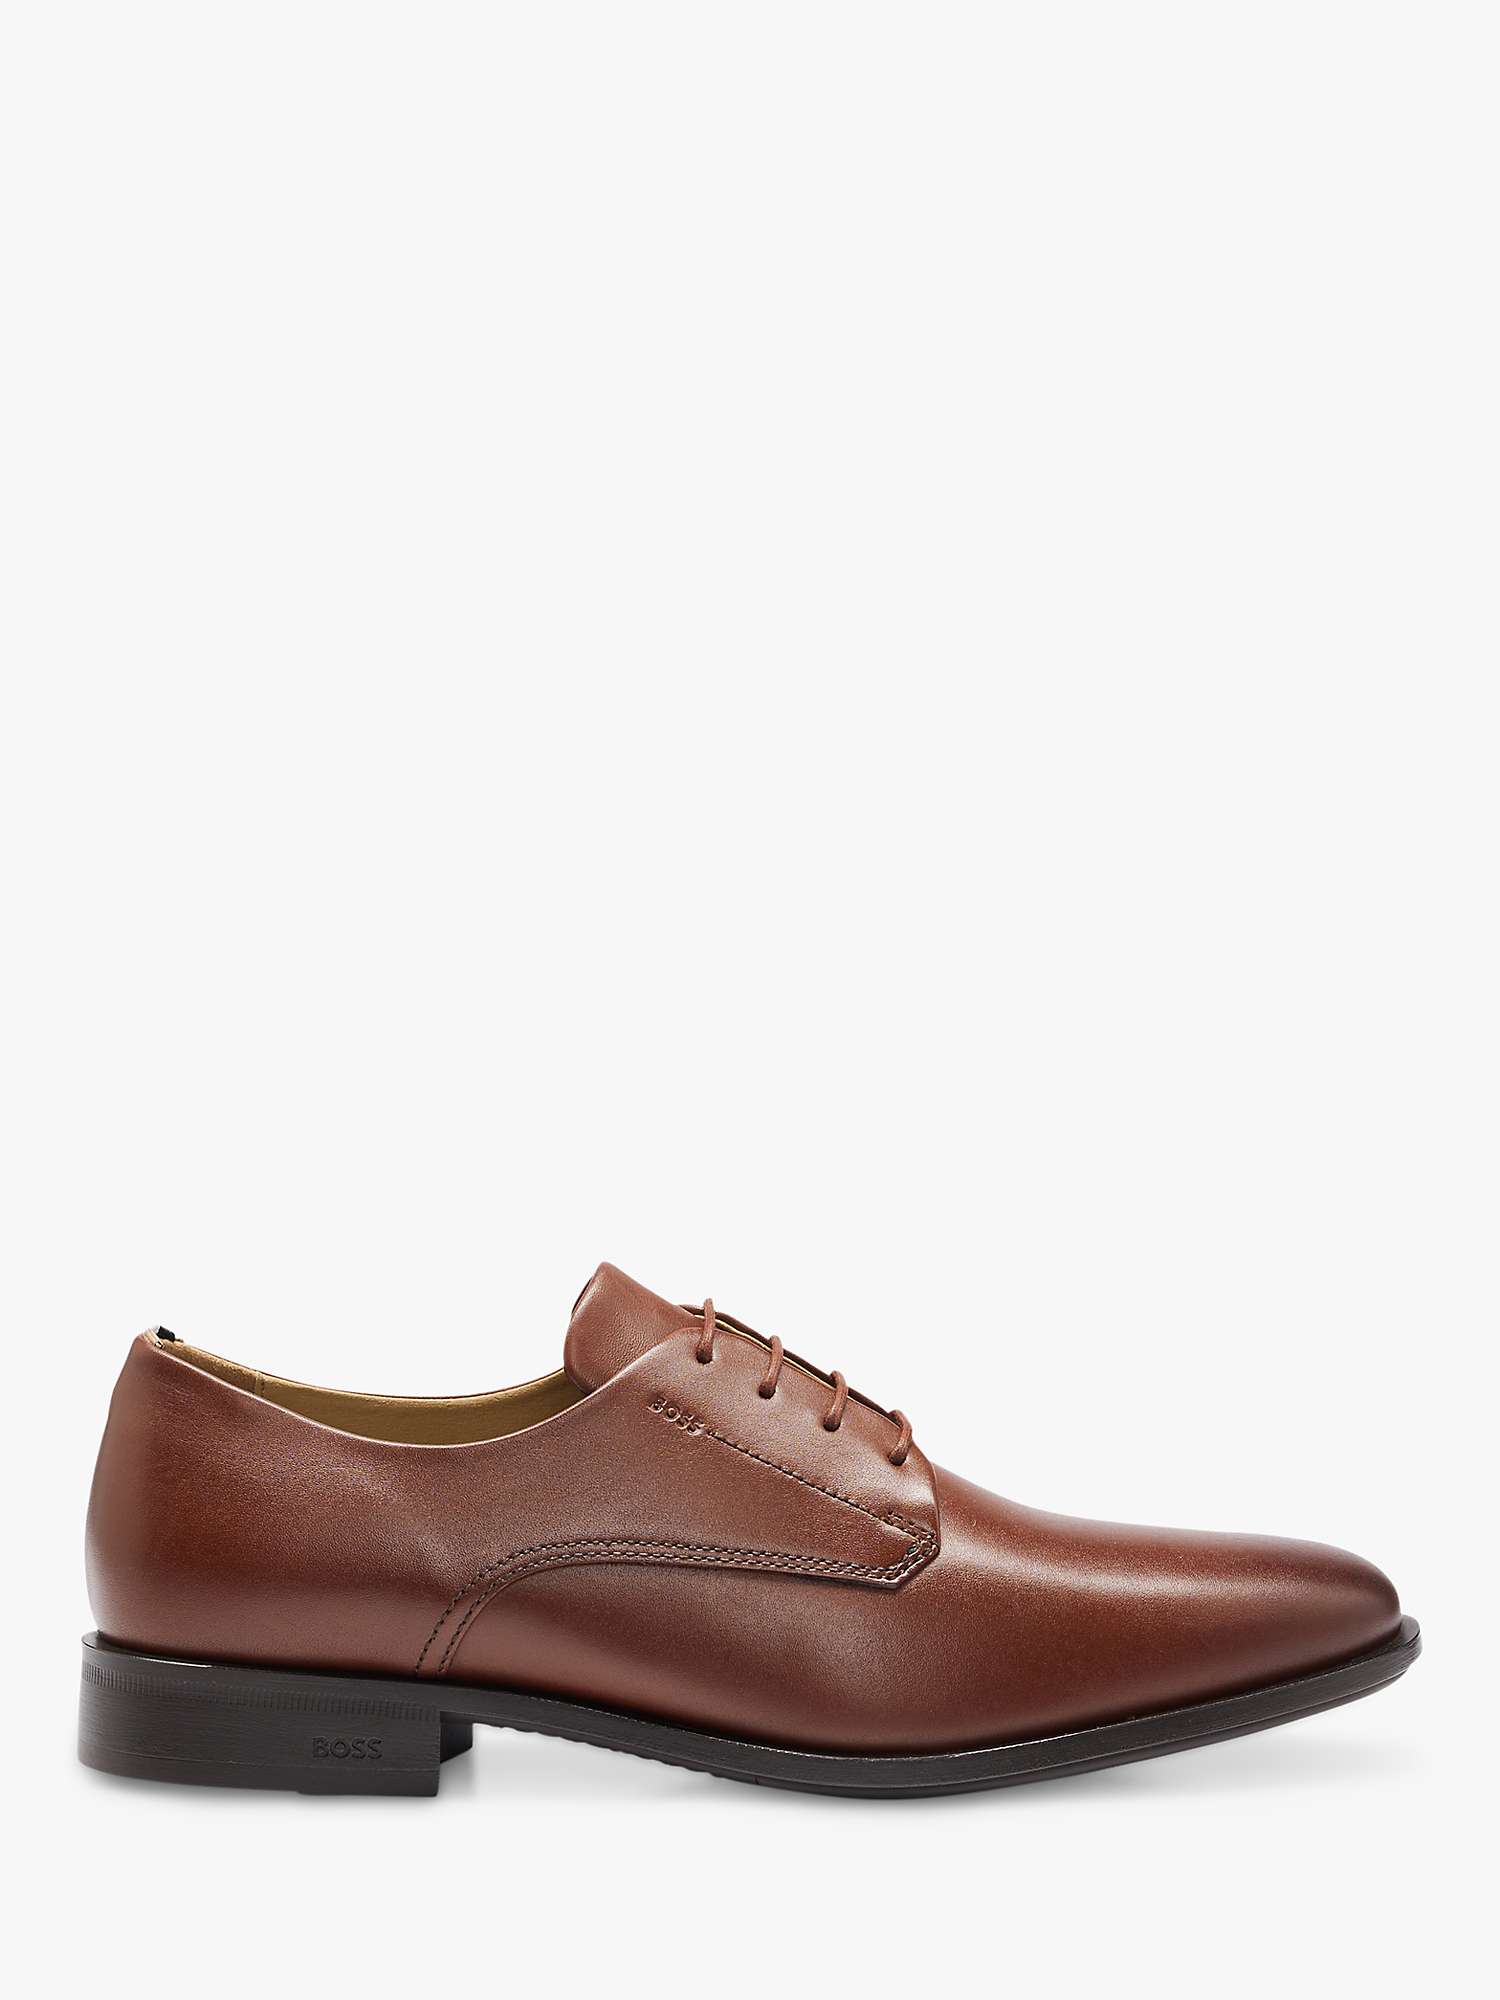 Buy BOSS Colby Leather Derby Shoes, Medium Brown Online at johnlewis.com